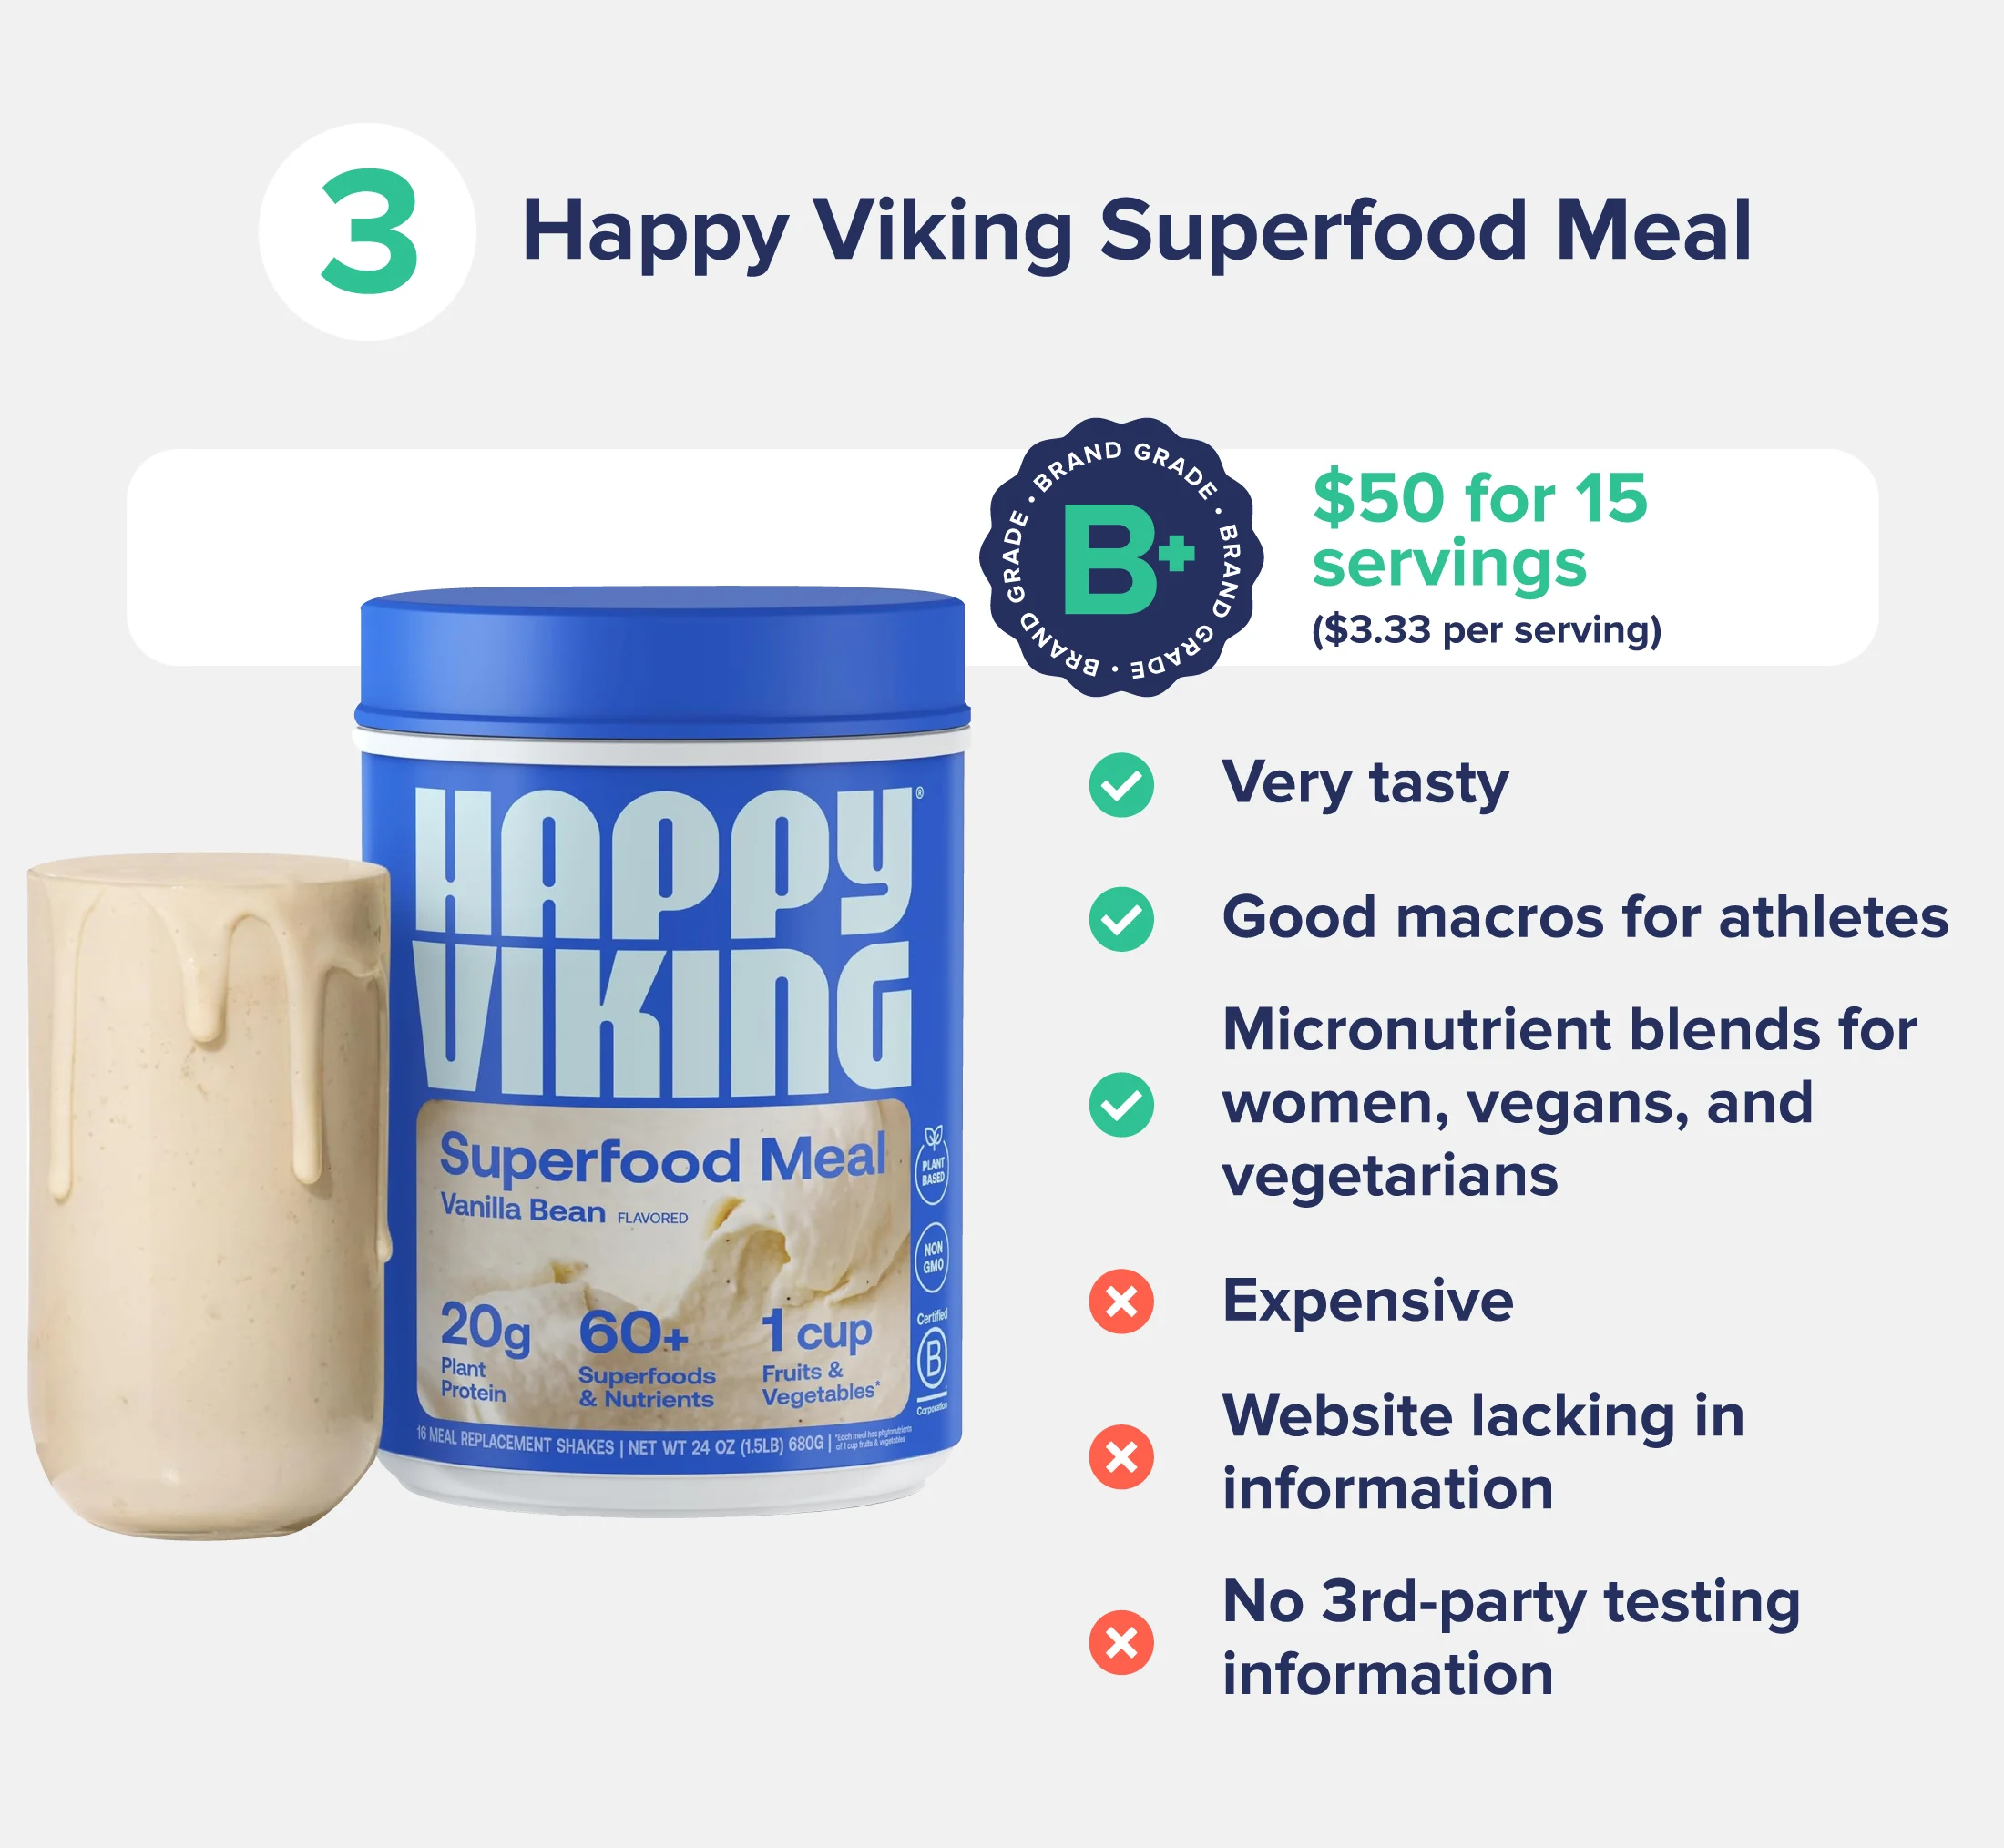 Happy Viking Superfood Meal with list of pros and cons